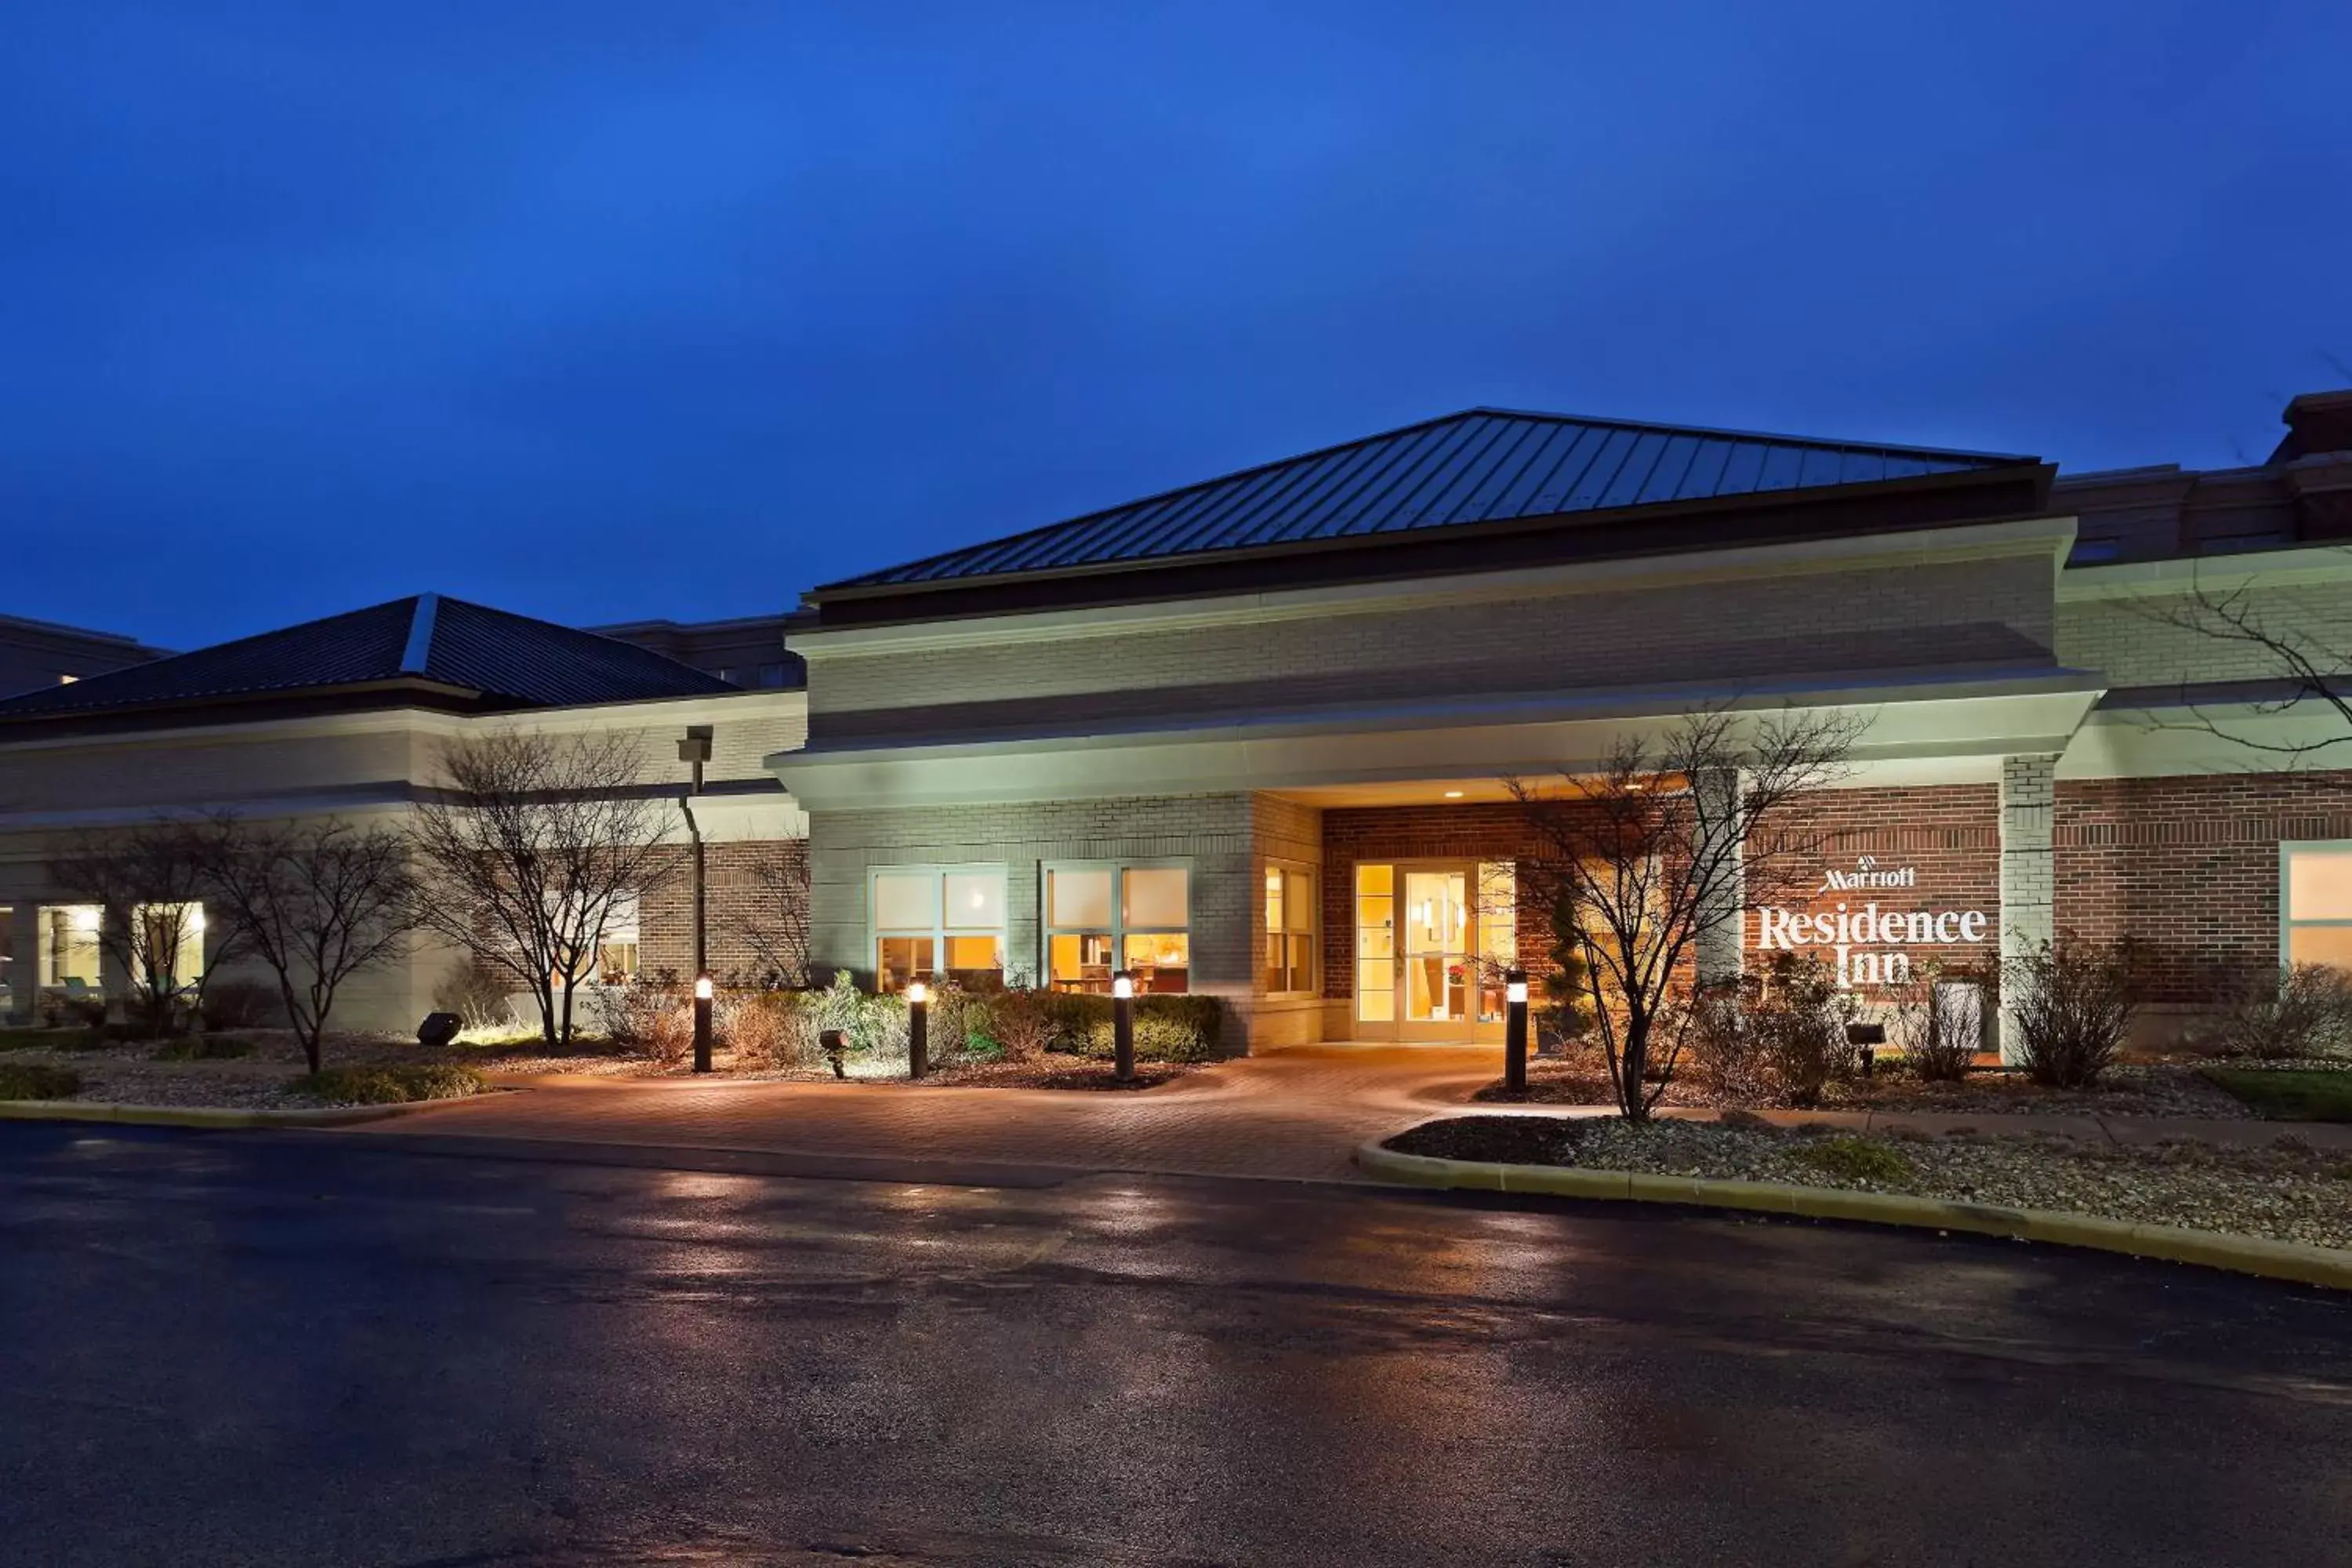 Property Building in Residence Inn Indianapolis Carmel